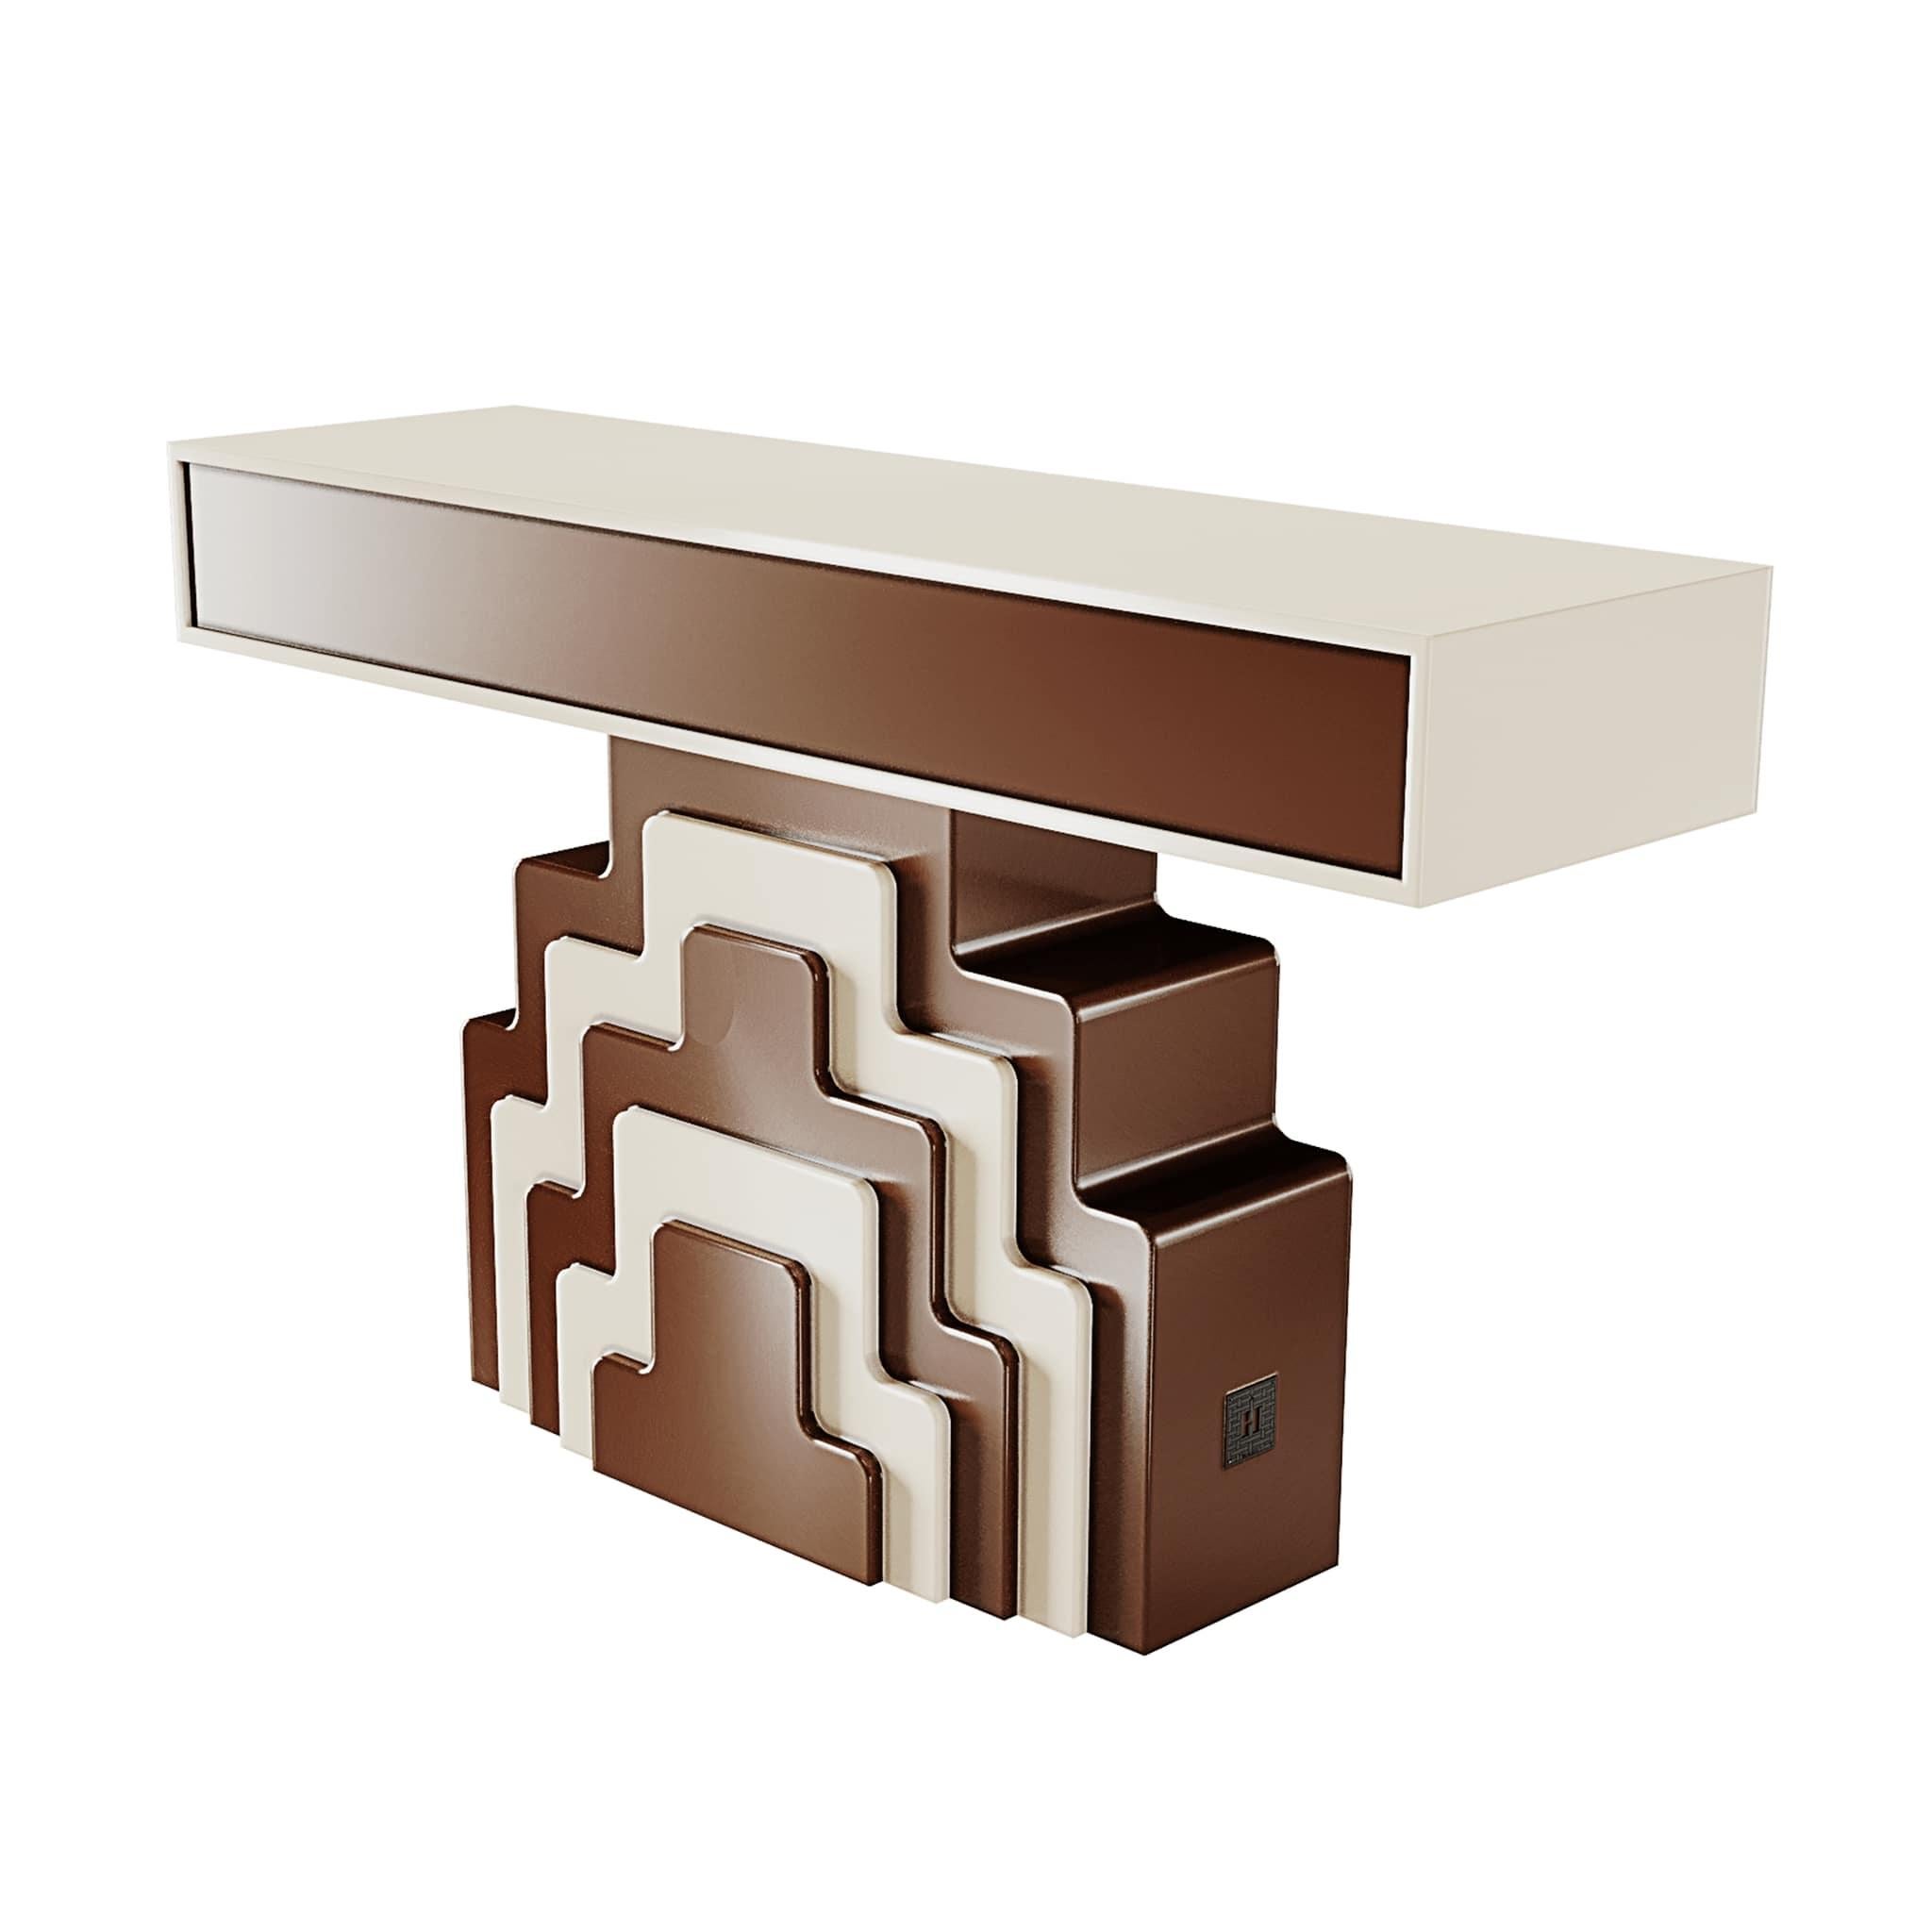 Portuguese Art Deco Inspired Geometic Wood Console Table Brown & White Lacquer Two Drawers For Sale